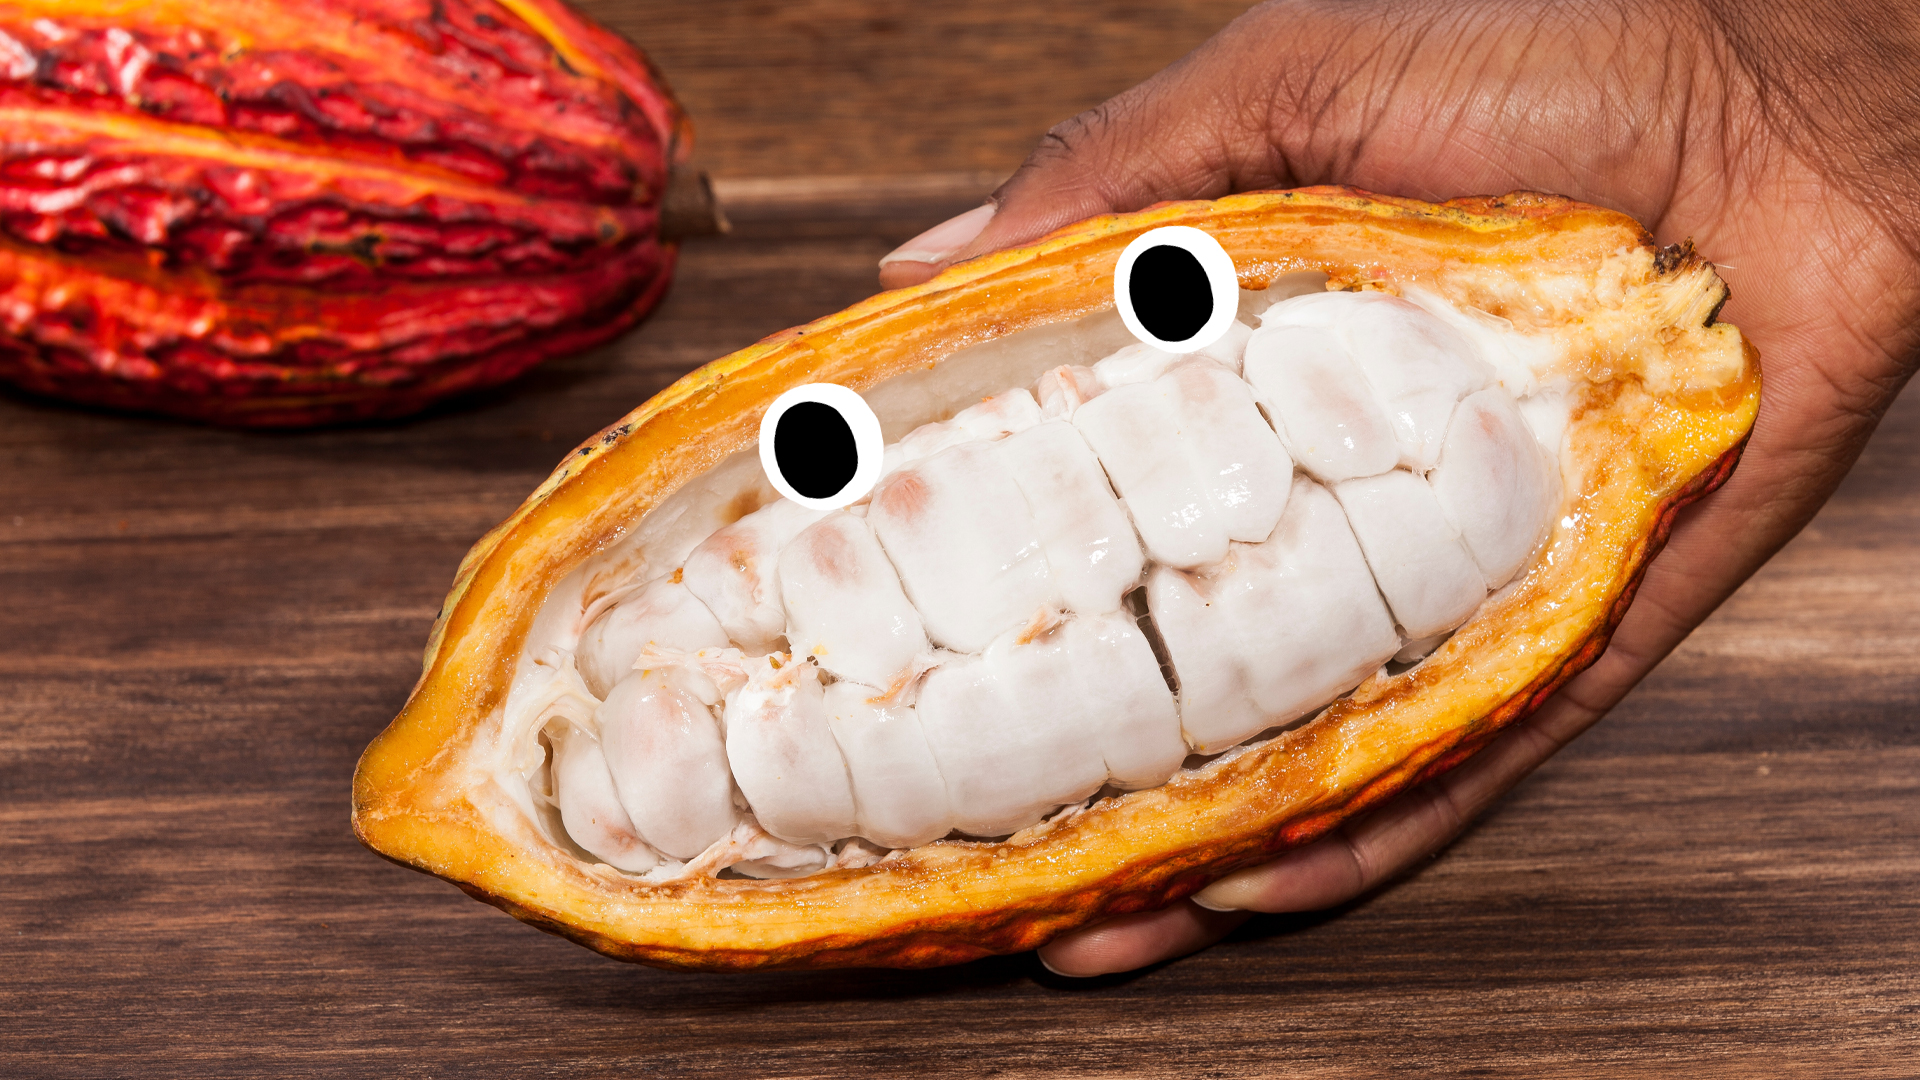 A cacao pod which will later be turned into chocolate